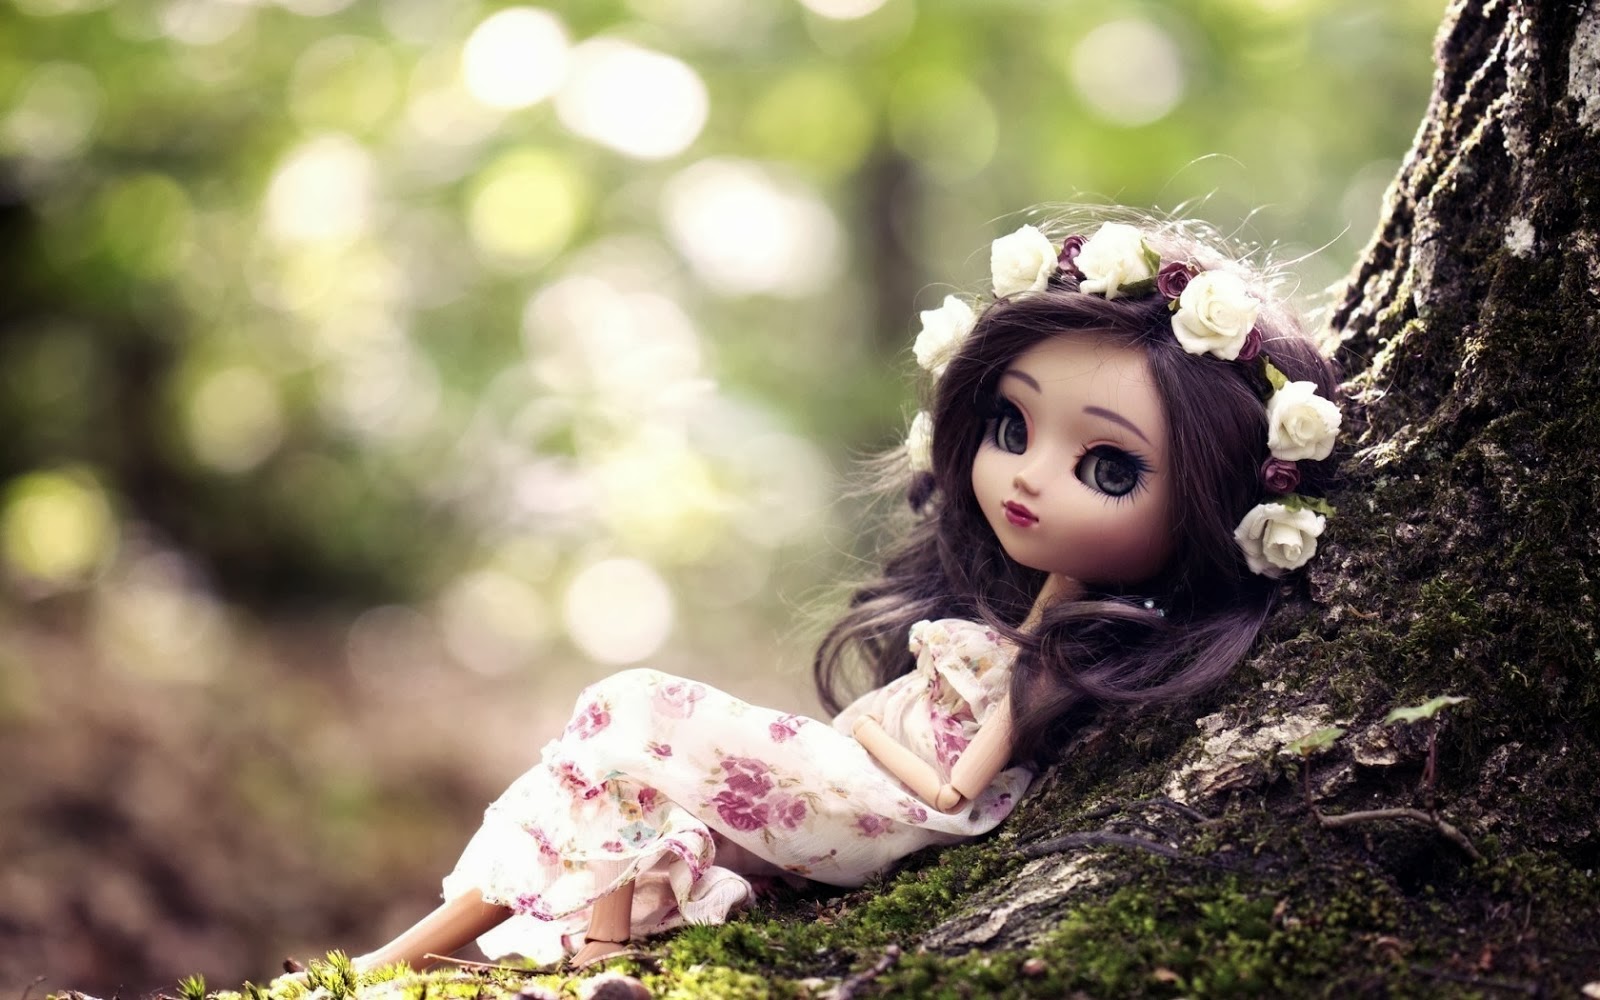  dolls by providing HD Wallpapers and Images of Cute Dolls which are